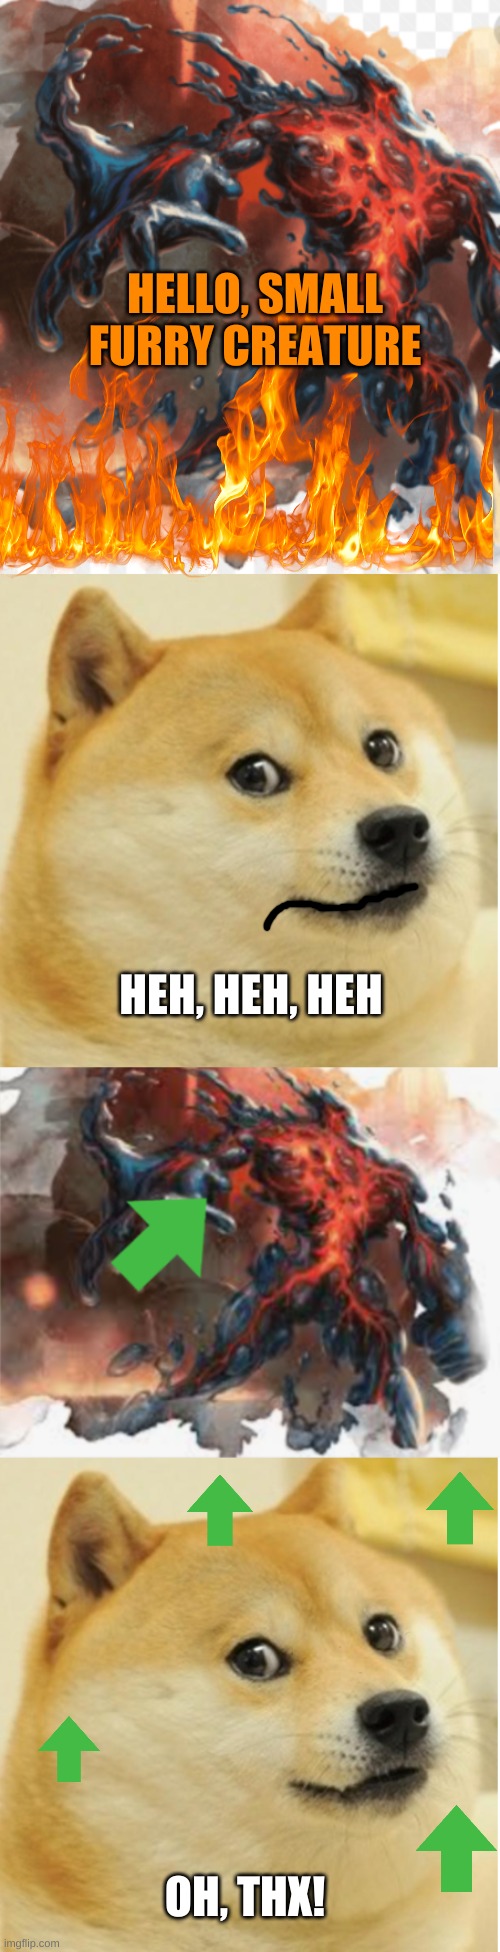 doge gets attacked | HELLO, SMALL FURRY CREATURE; HEH, HEH, HEH; OH, THX! | image tagged in story,meme,doge | made w/ Imgflip meme maker